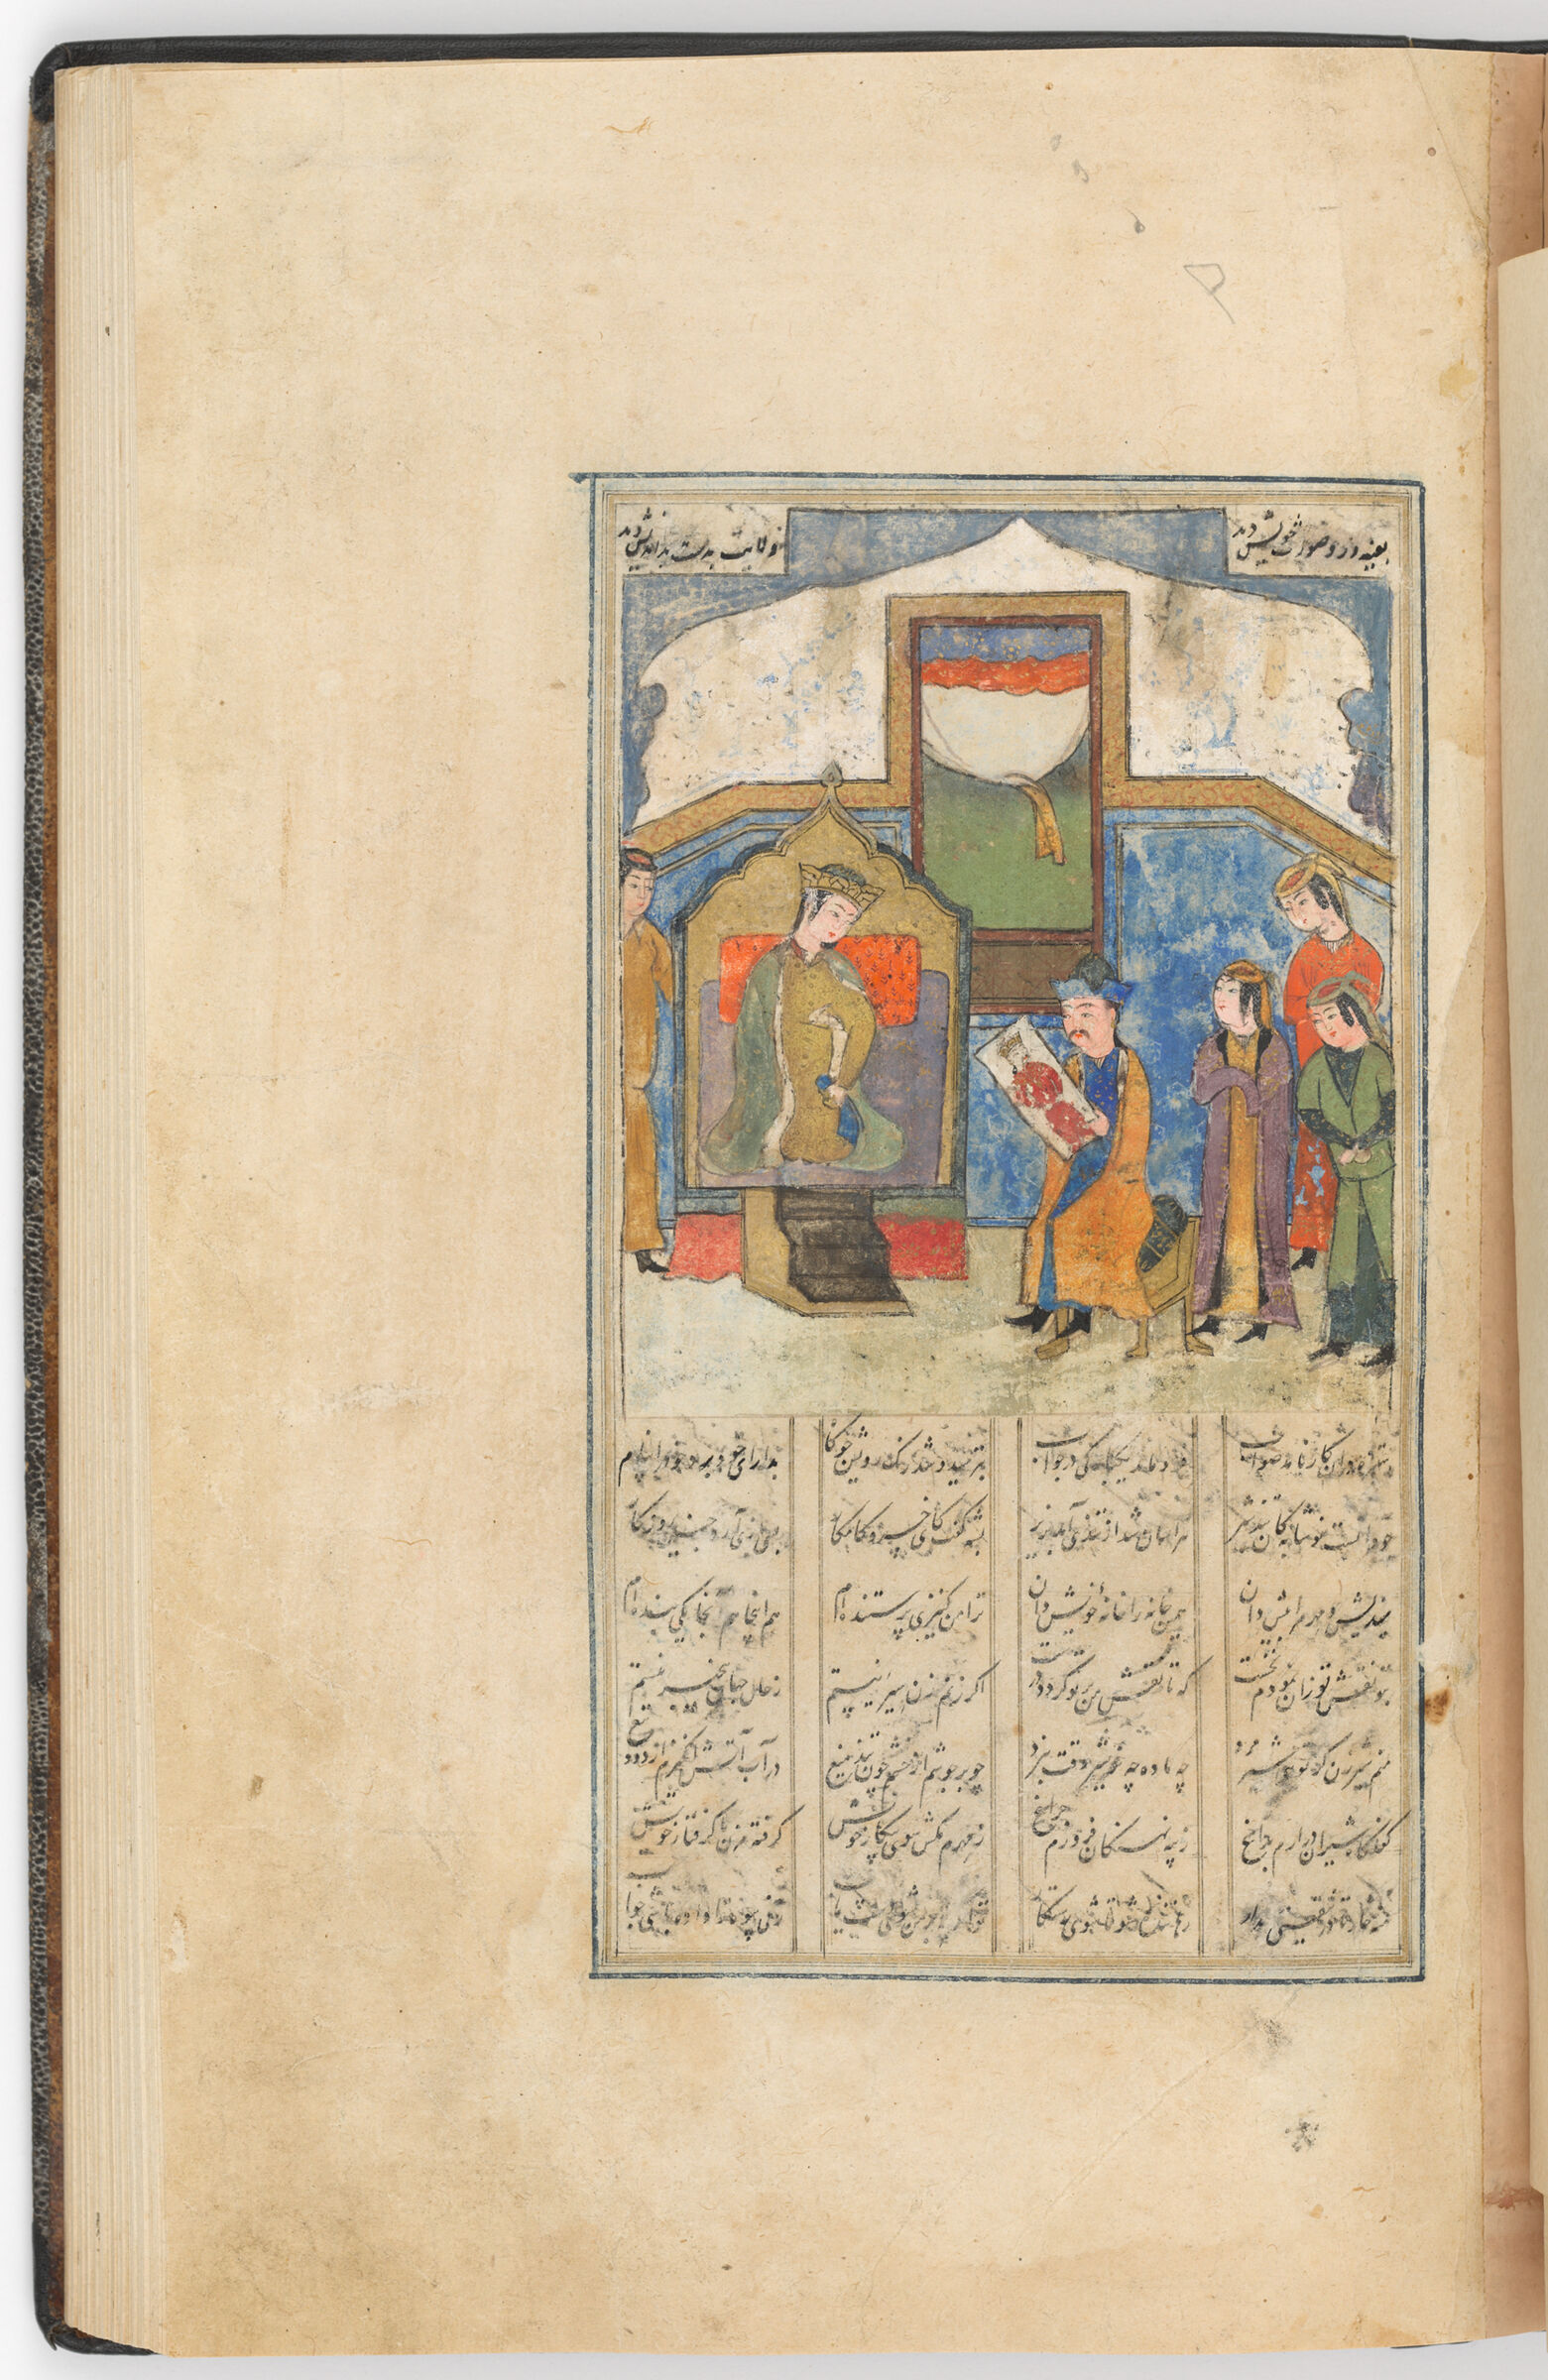 Nushaba Recognizing Iskandar By His Portrait (Text Verso; Painting Recto Of Folio 291), Painting From A Manuscript Of The Khamsa By Nizami